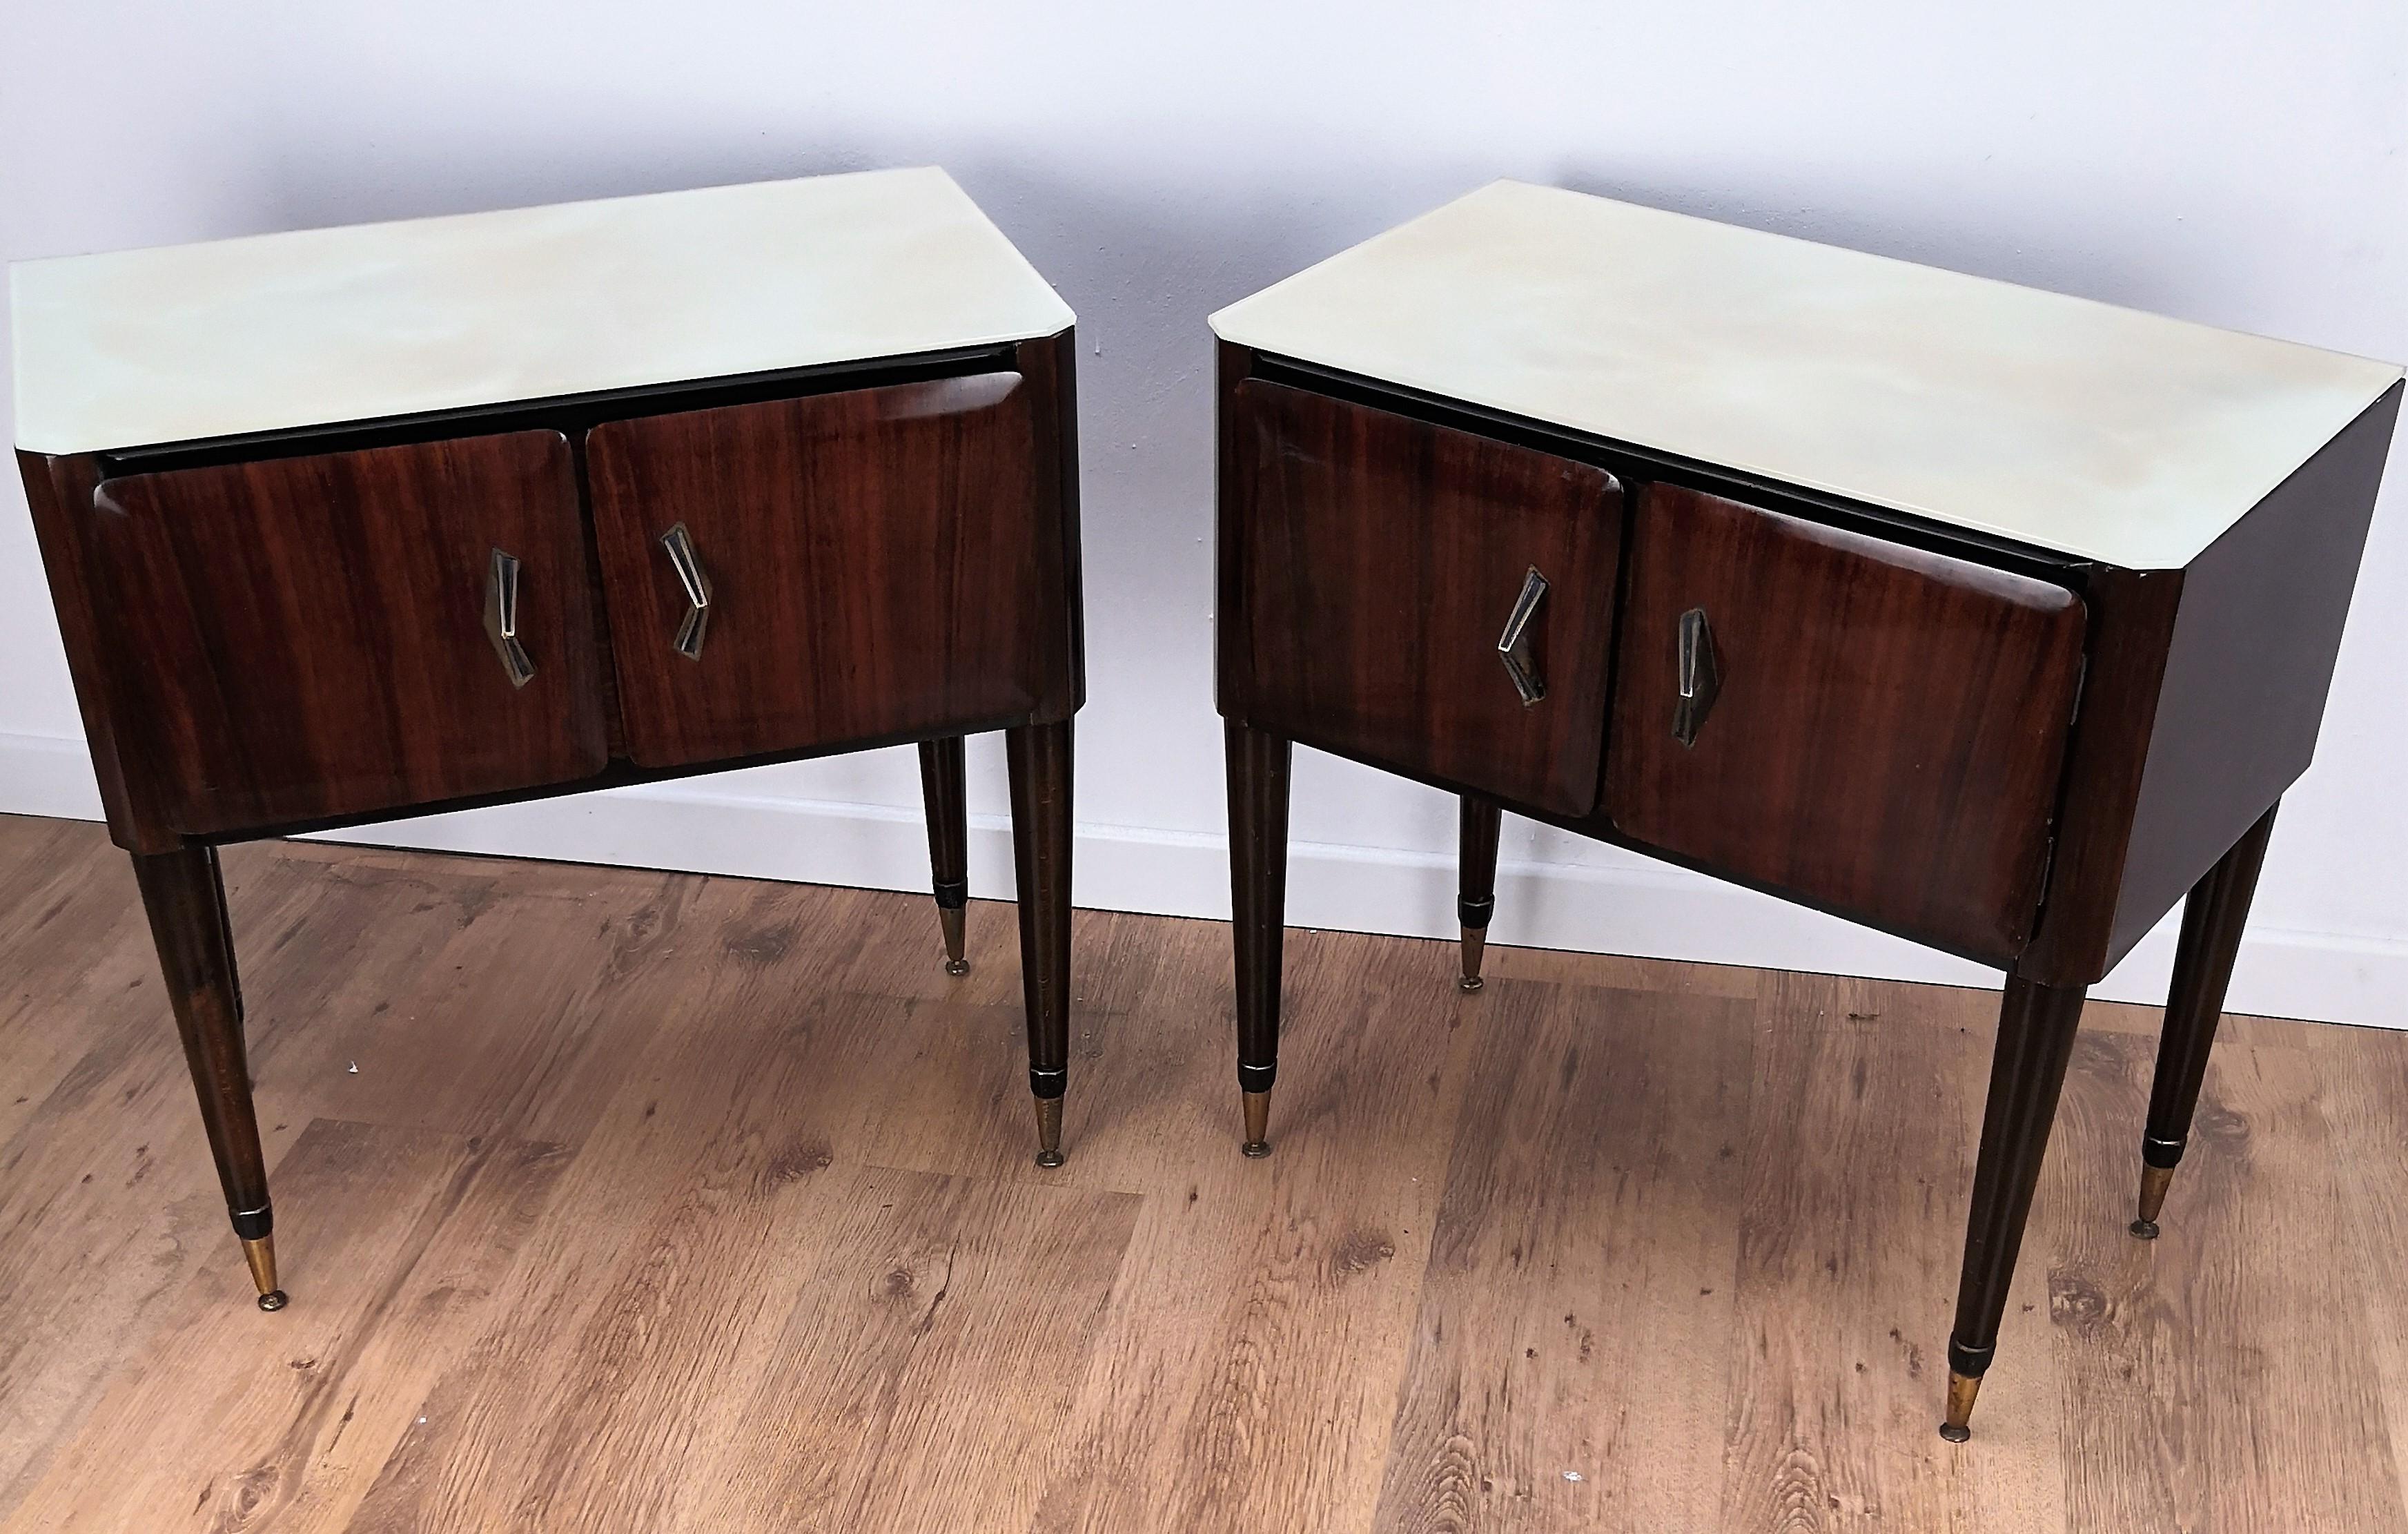 20th Century Pair of Midcentury Italian Art Deco Nightstands Bedside Tables Marble Glass Top